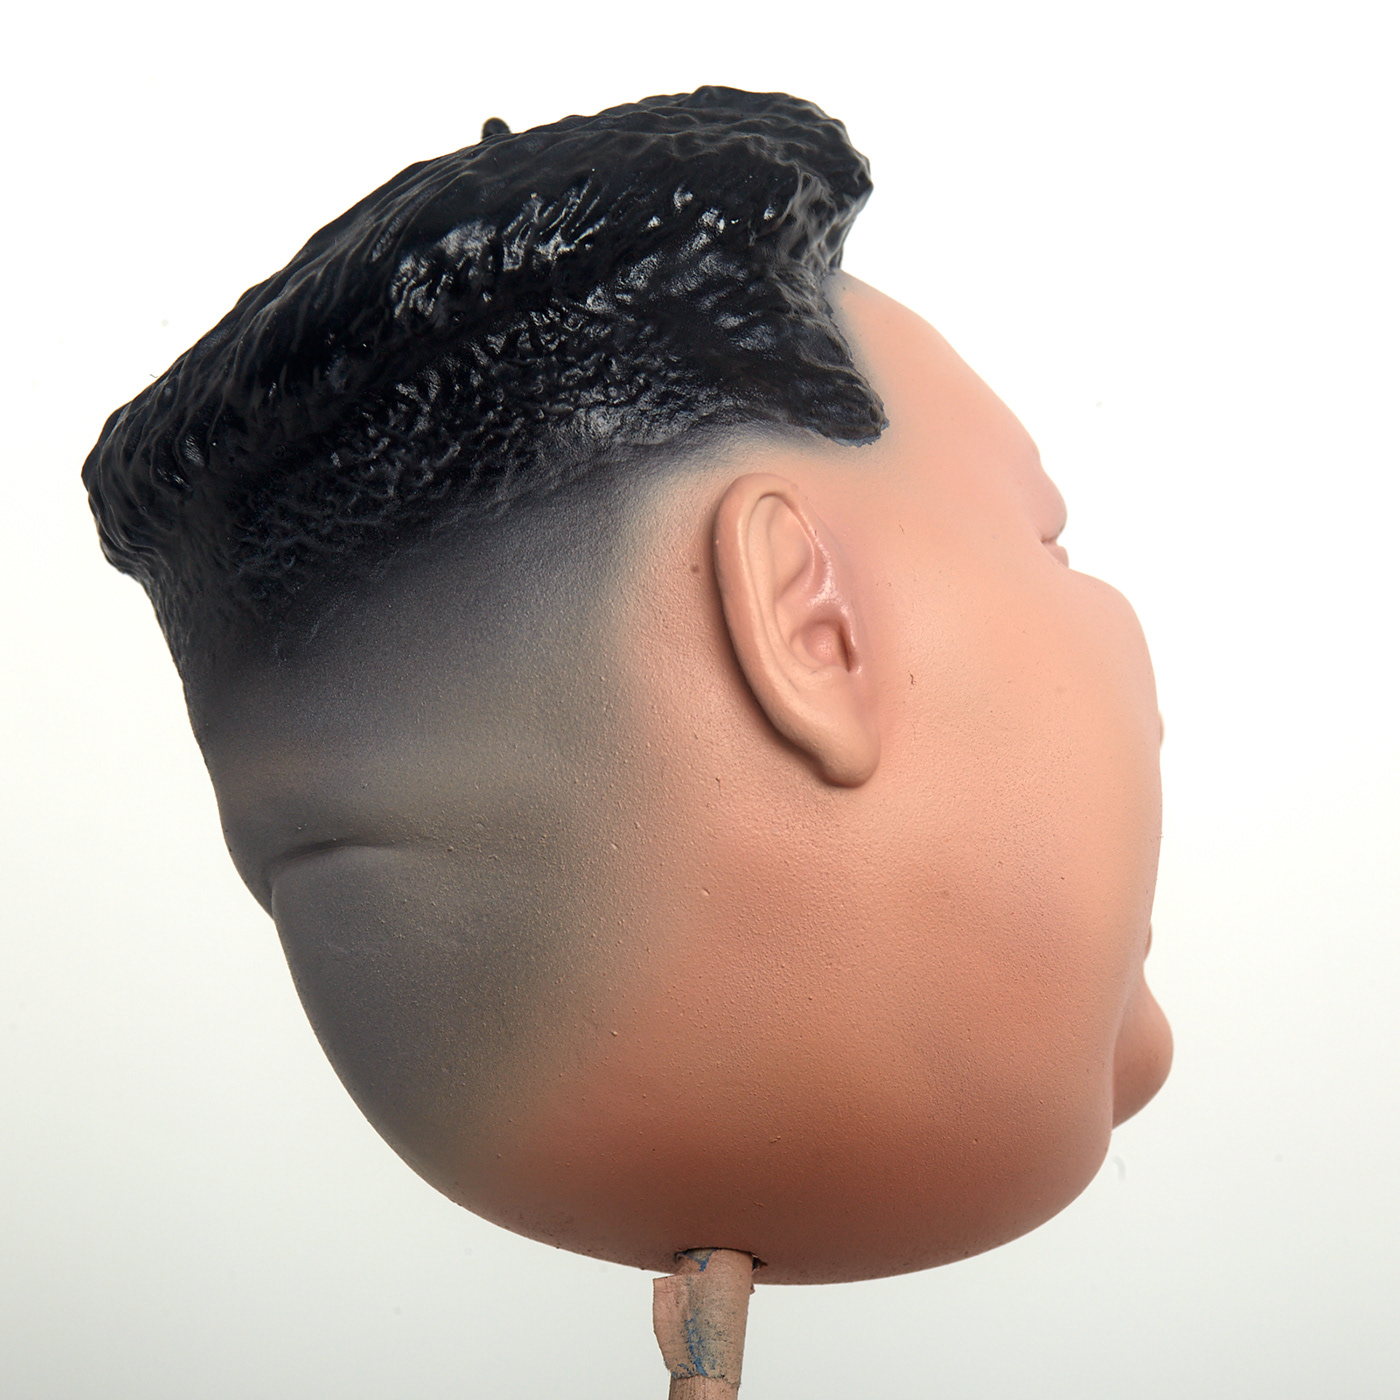 Kim Hair v2 02 (add stubble growth and harder edge to hairline) 